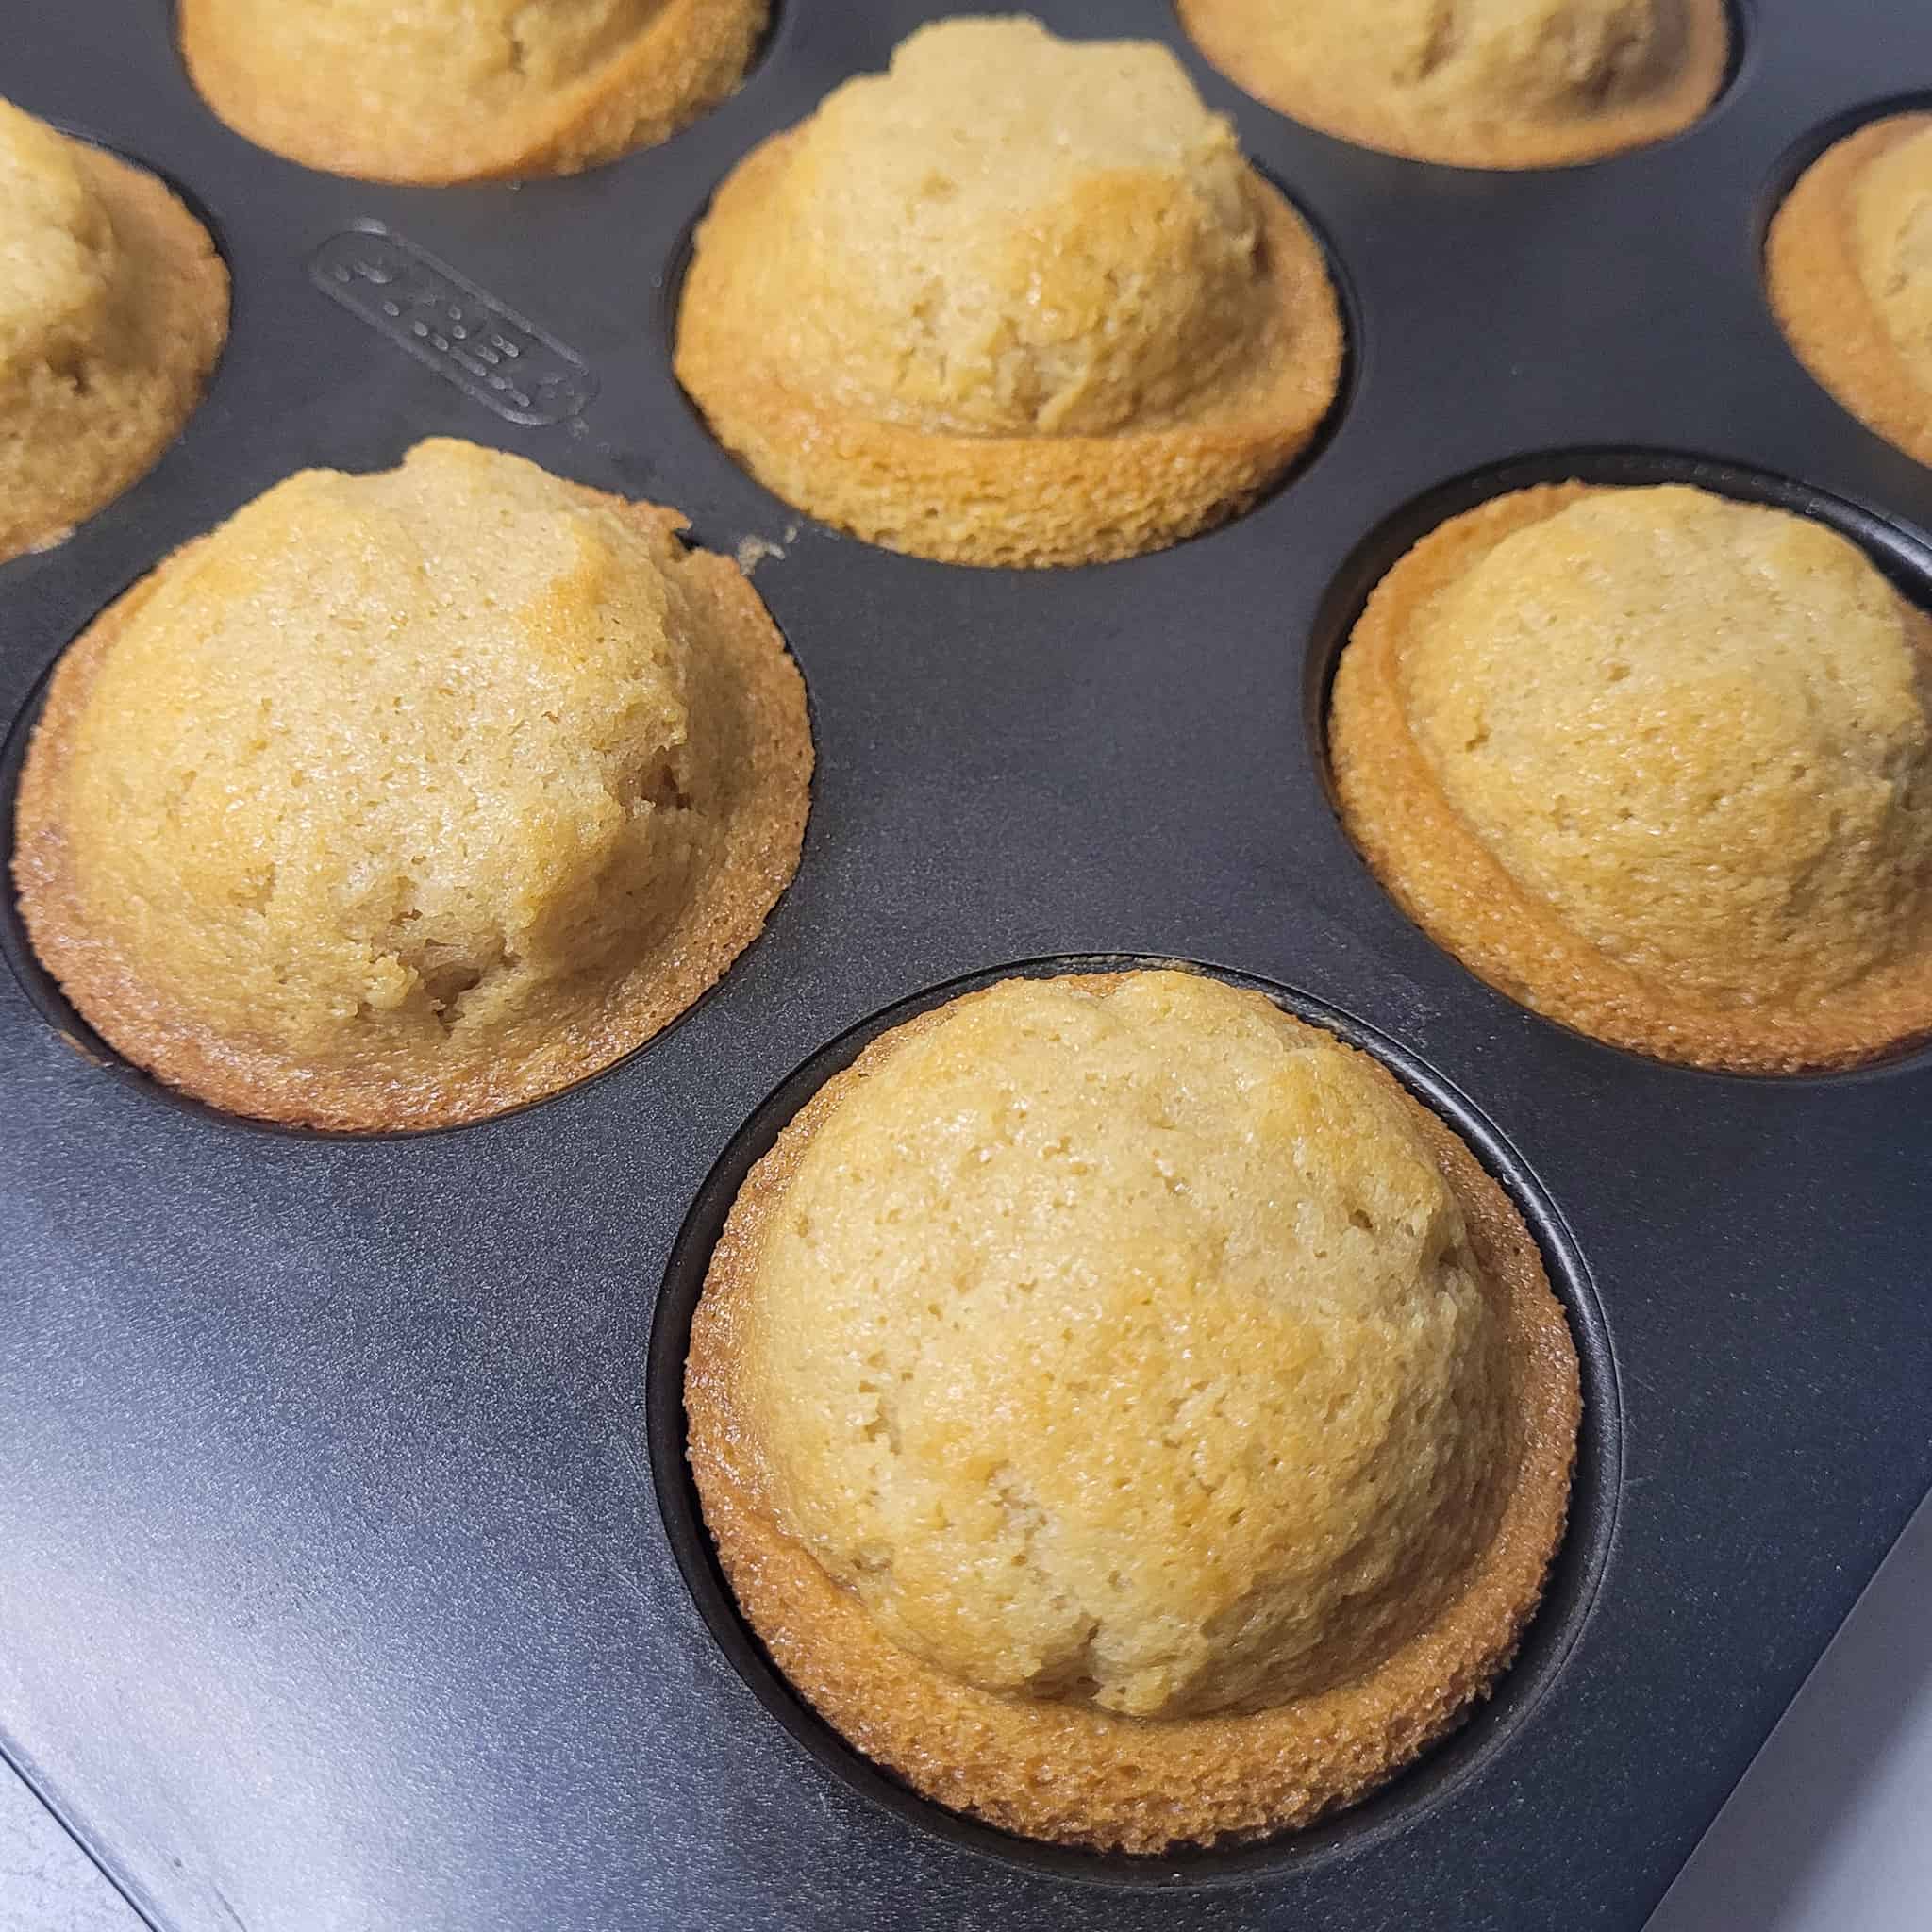 Baked Filipino muffins in a pan